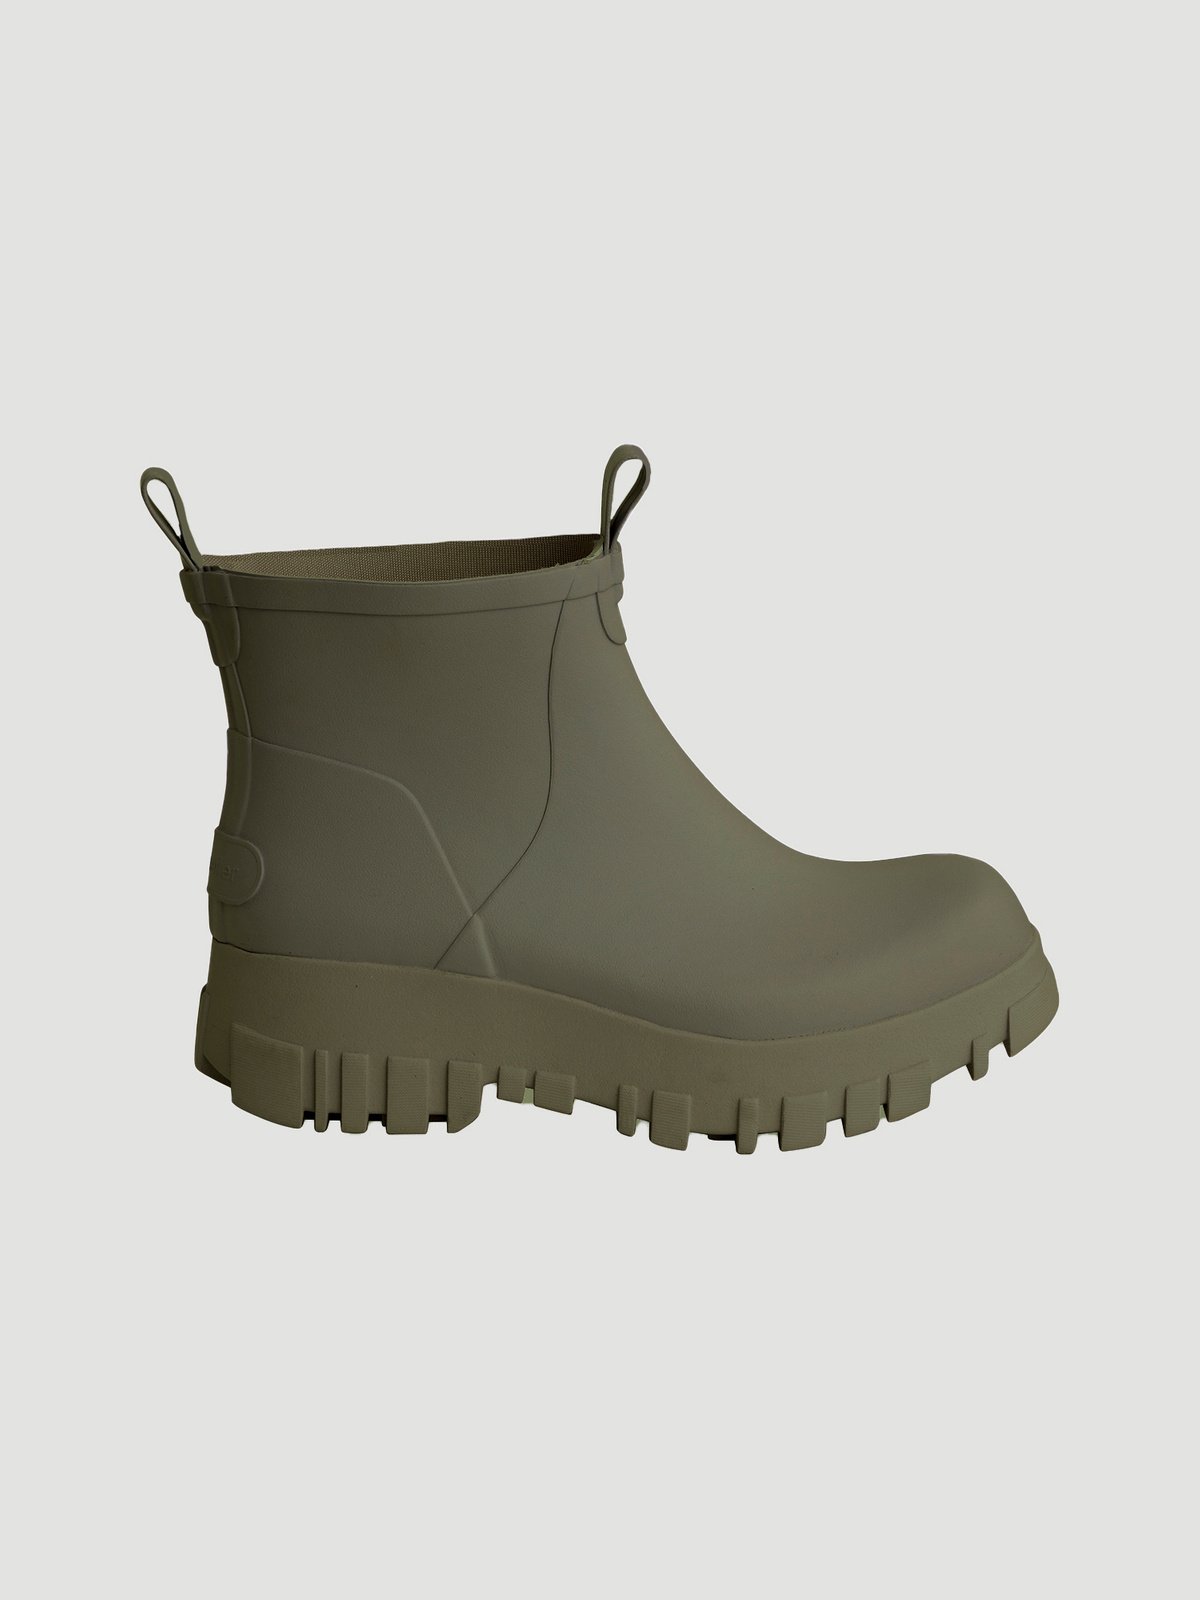 
                  
                    HOLZWEILER ANDY ANCLE BOOTS ARMY
                  
                